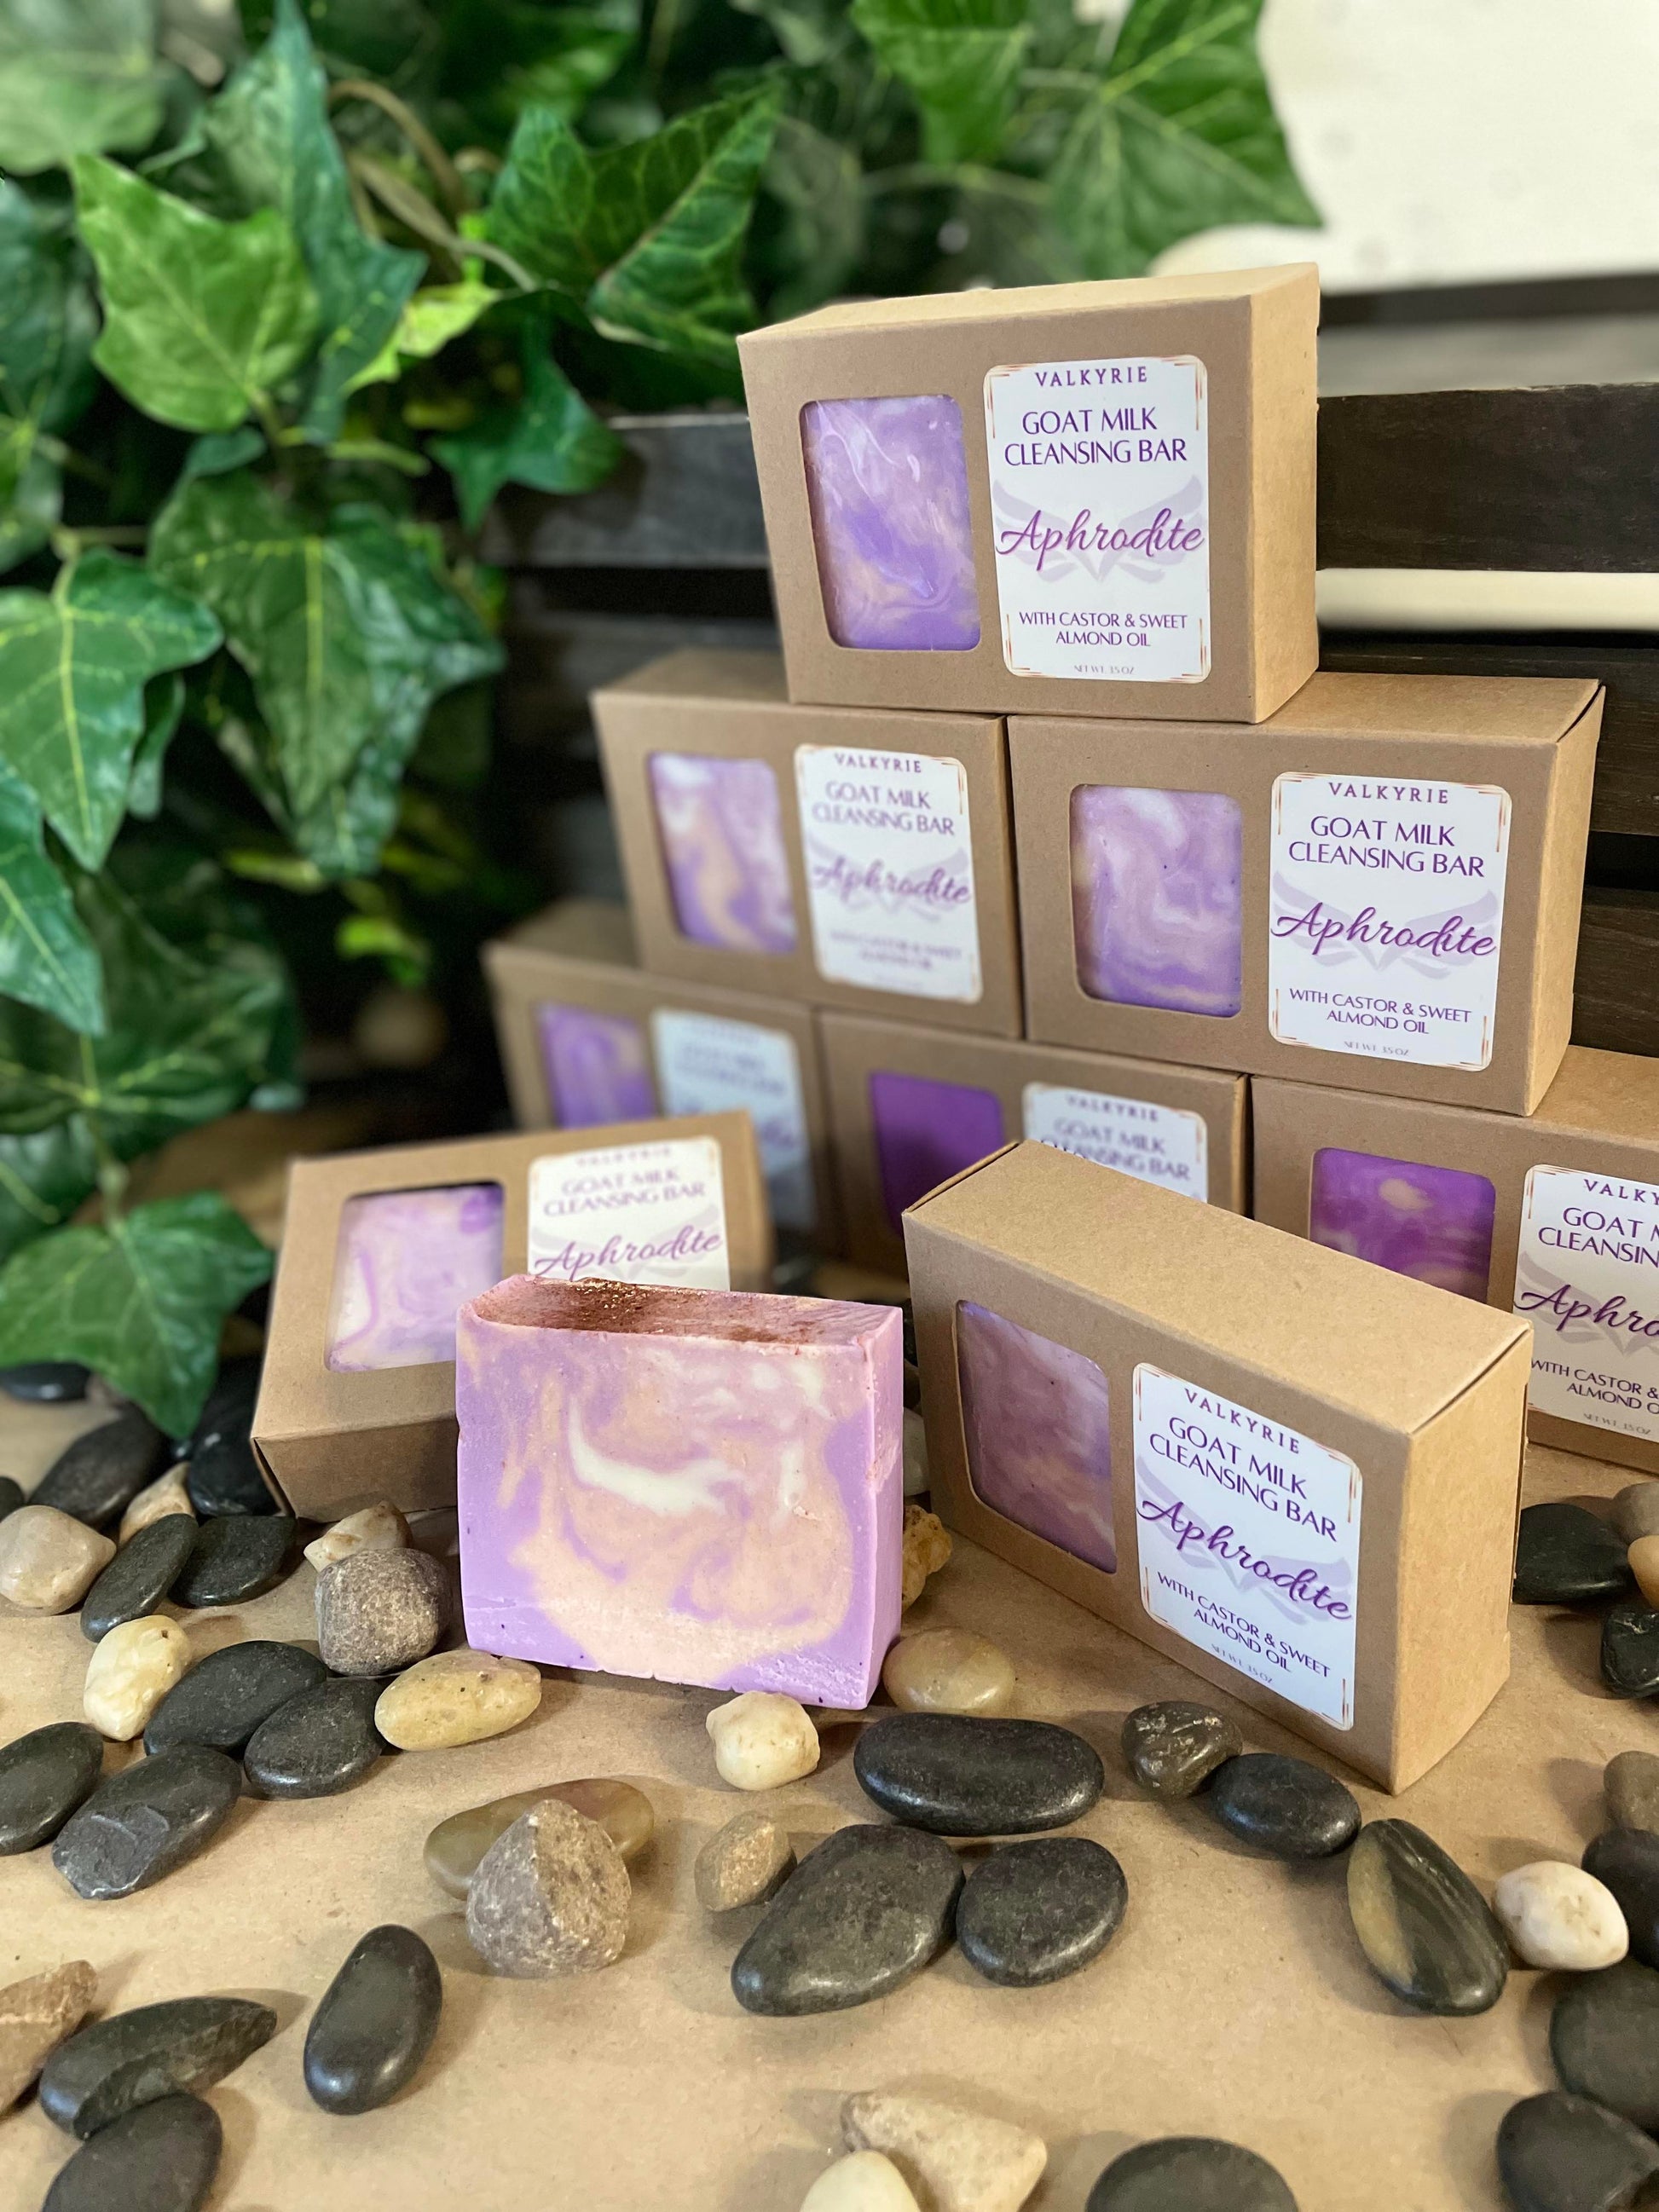 Aphrodite Goat Milk Cleansing Bar Valkyrie Global Skin Care Self Care Beauty St. Catharines Ontario Canada